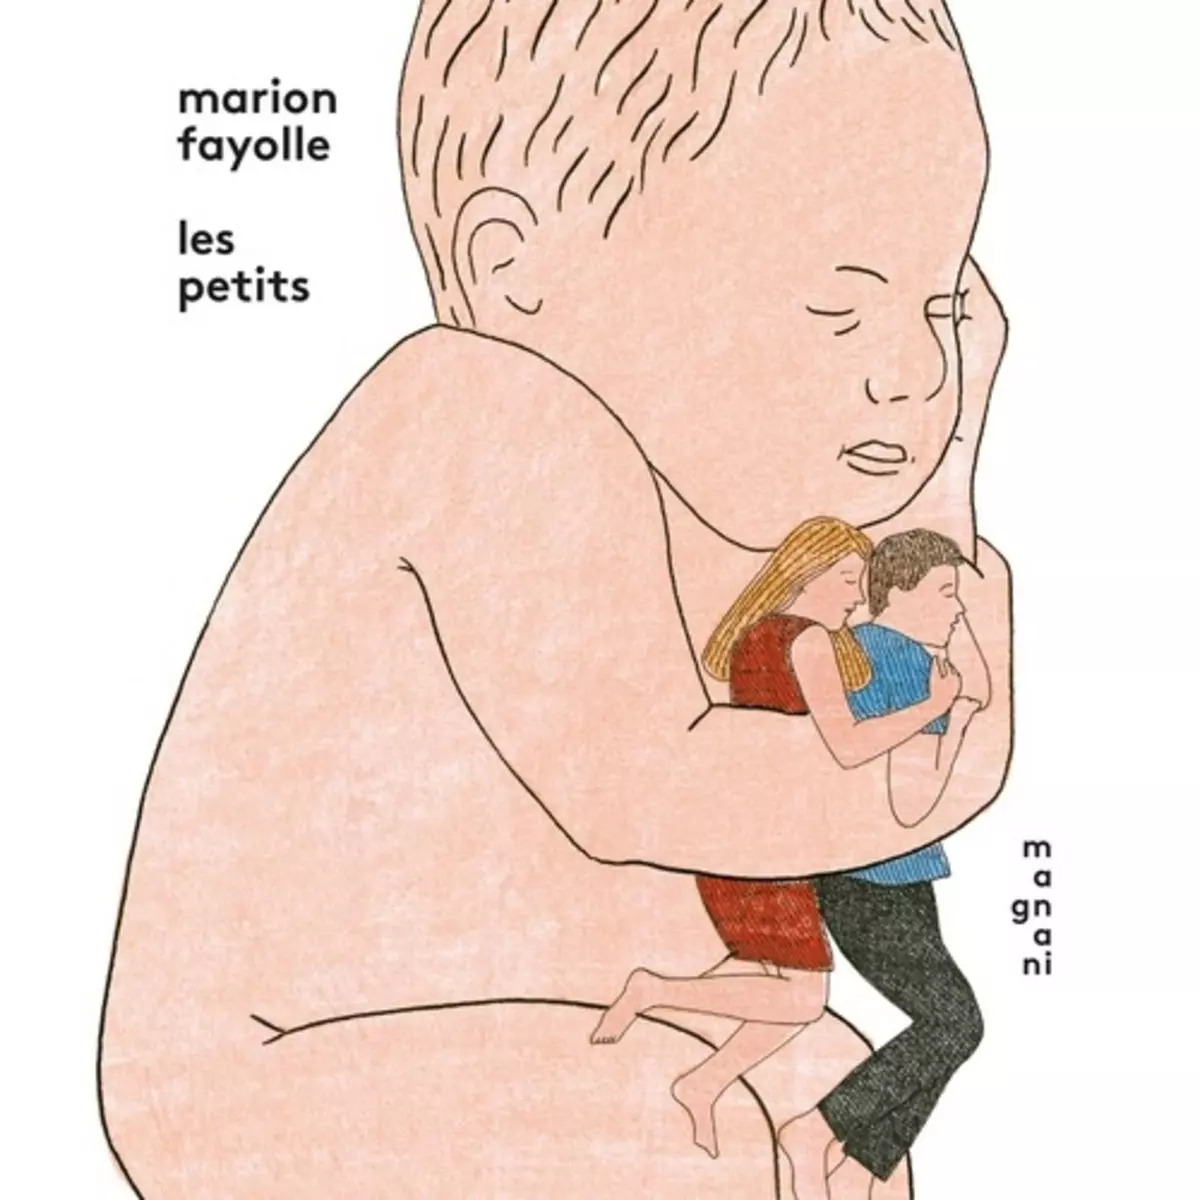  LES PETITS, Fayolle Marion